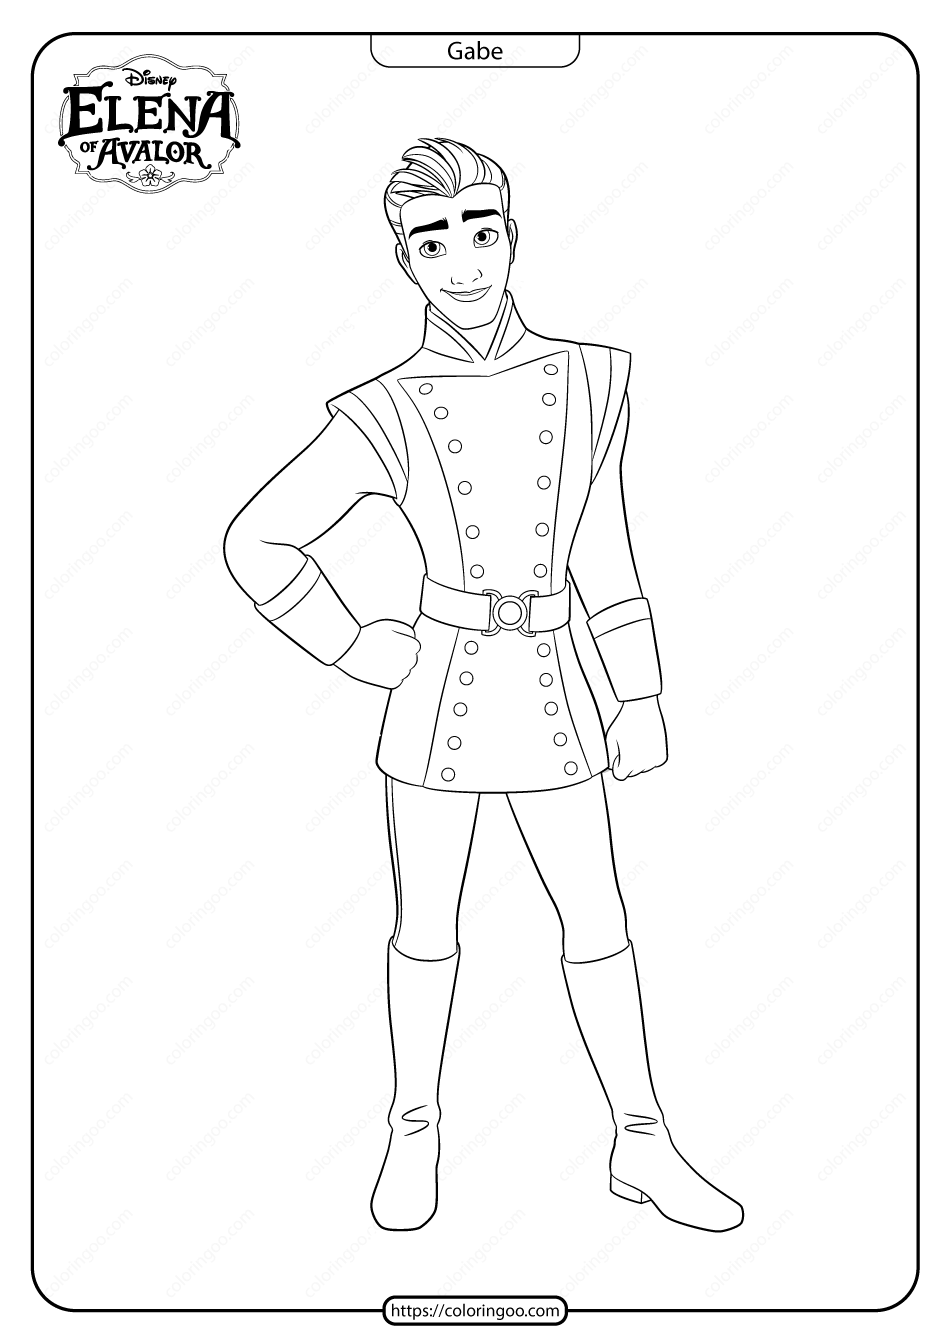 printable elena of avalor gabe coloring pages